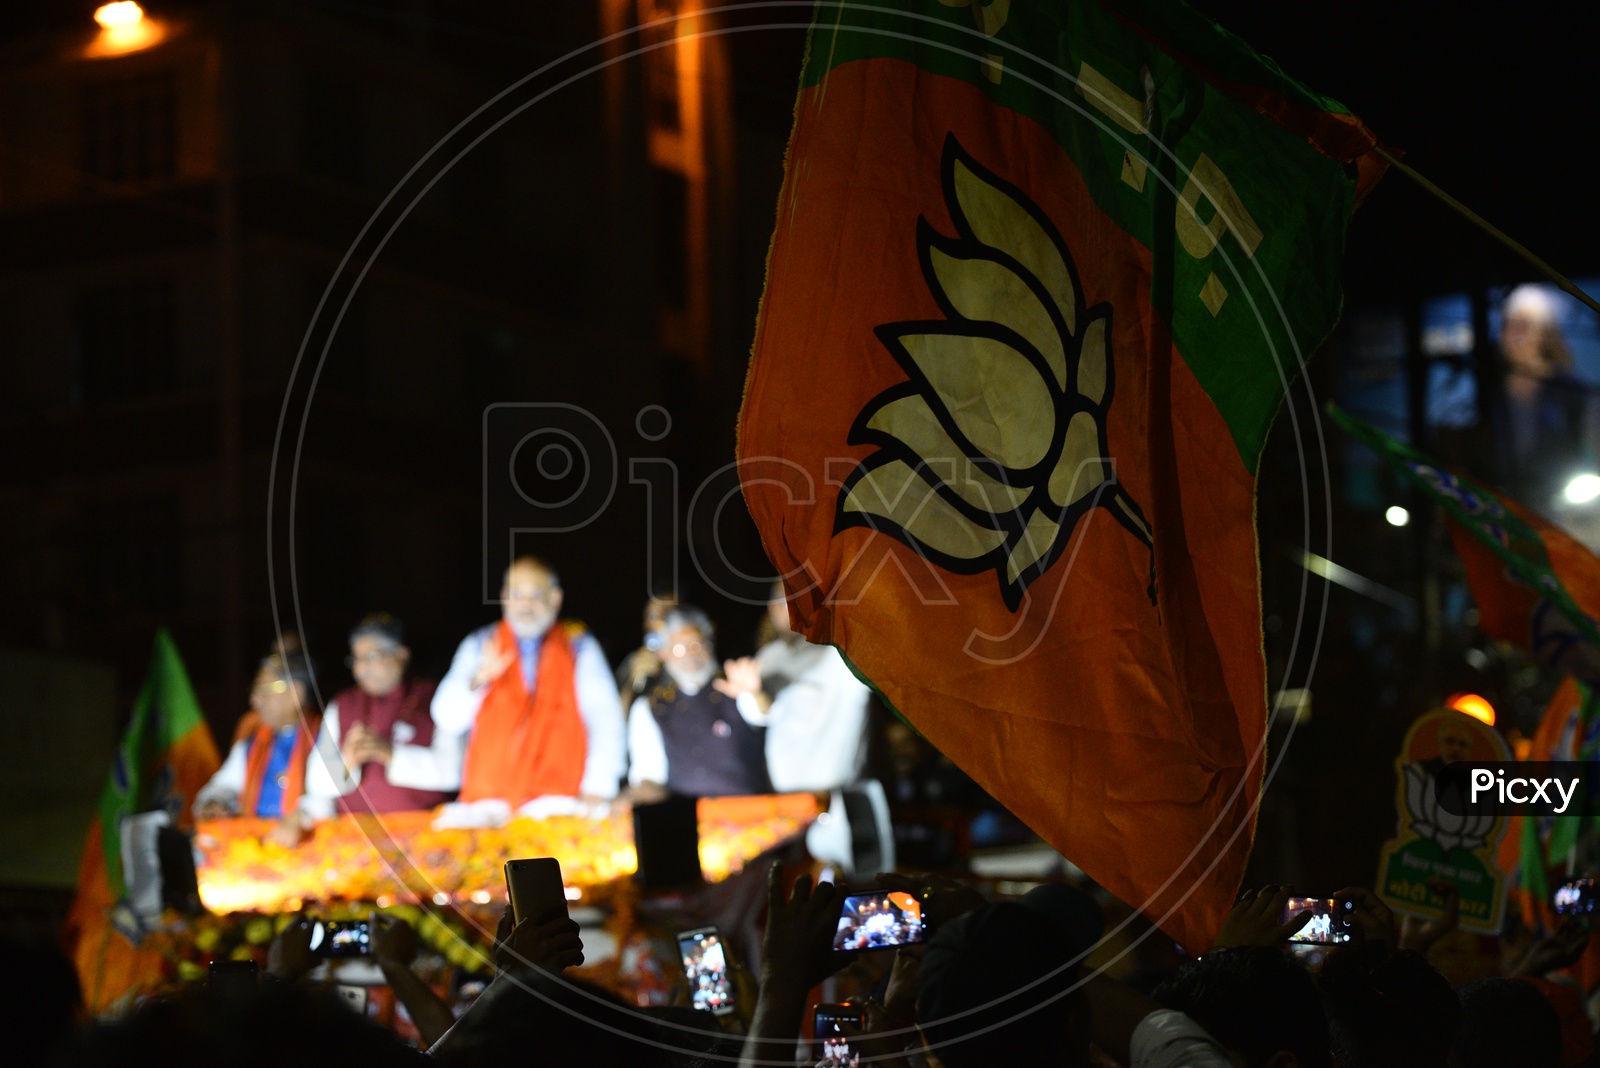 BJP Party Flags In Election Campaign  Rallies For 2019 Lok Sabha Elections